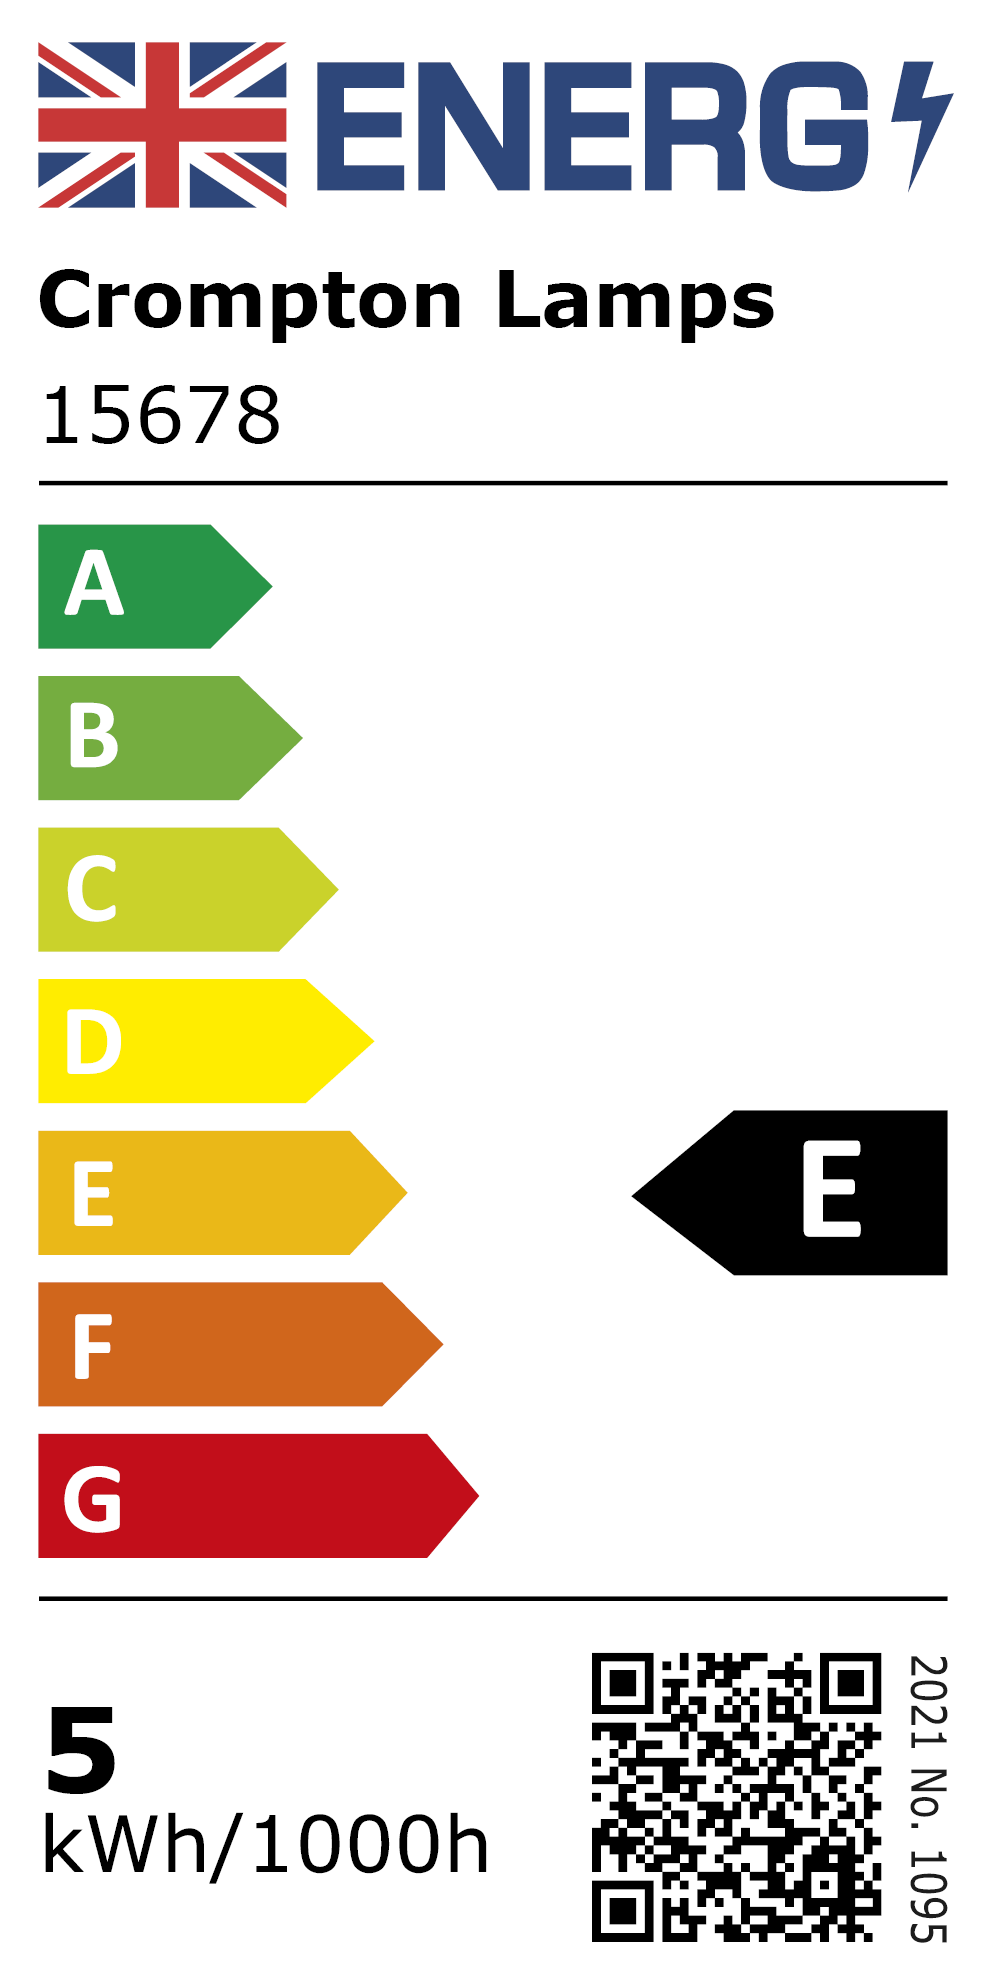 New 2021 Energy Rating Label: MPN 15678